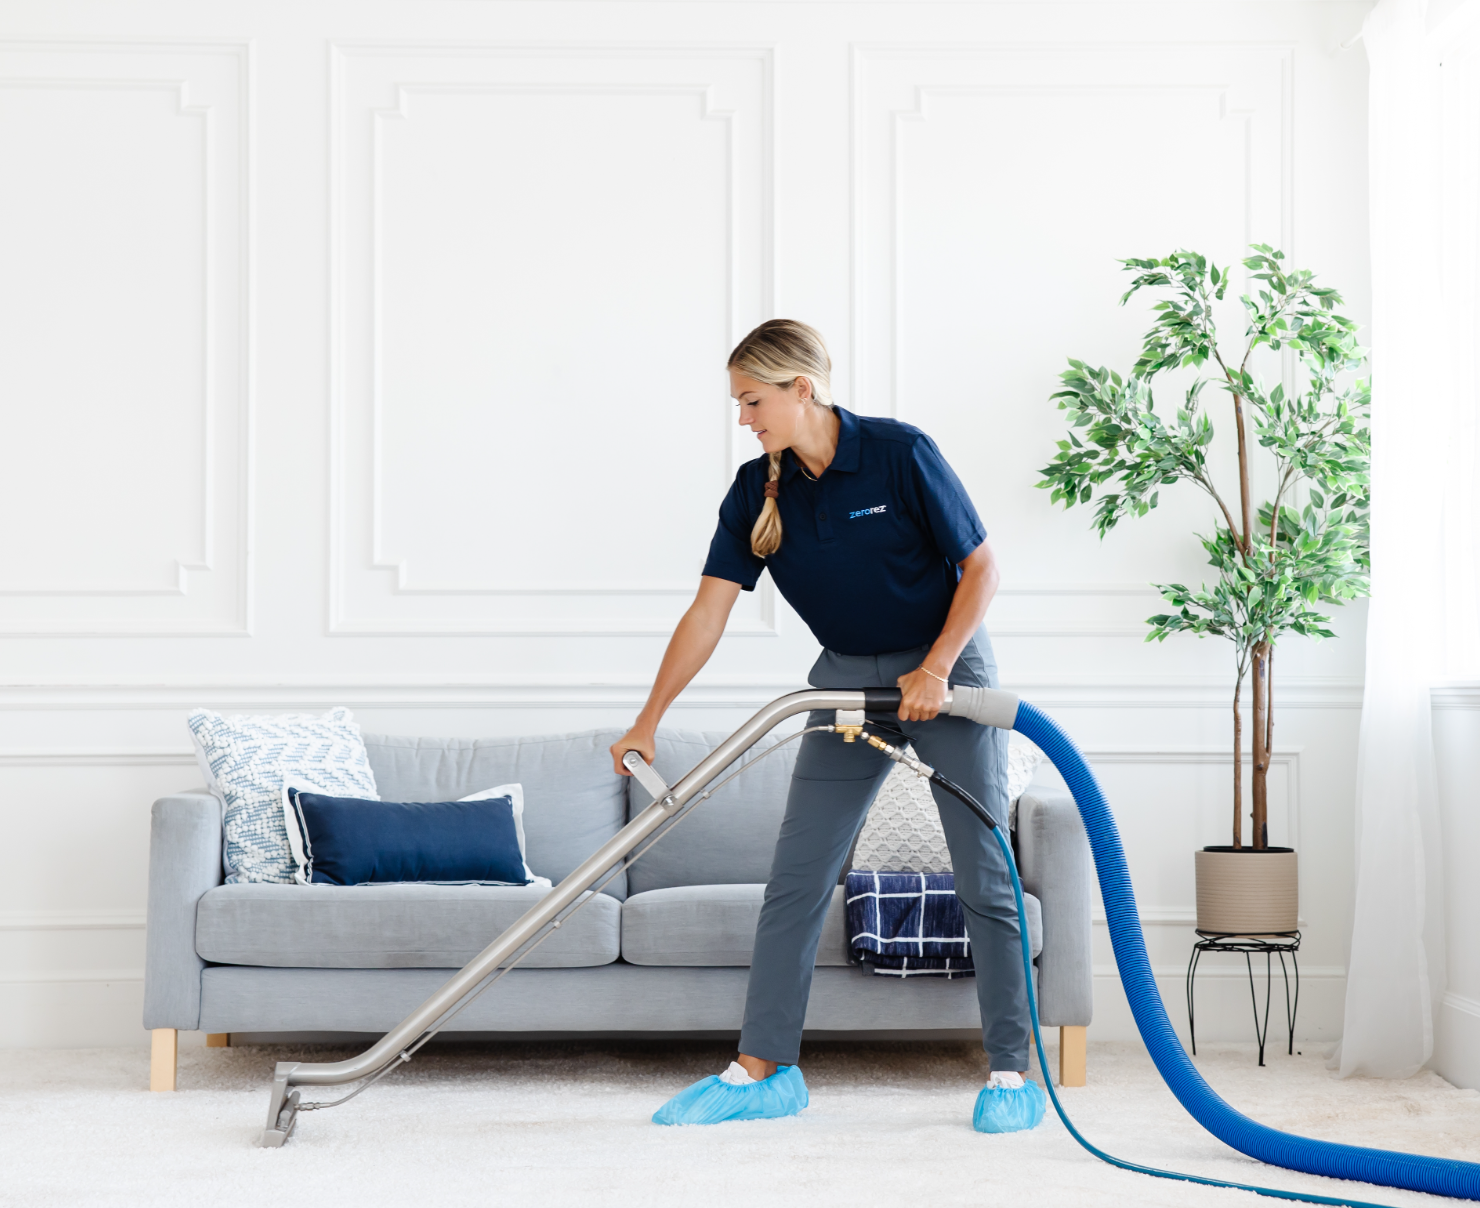 Carpet Cleaning Costs